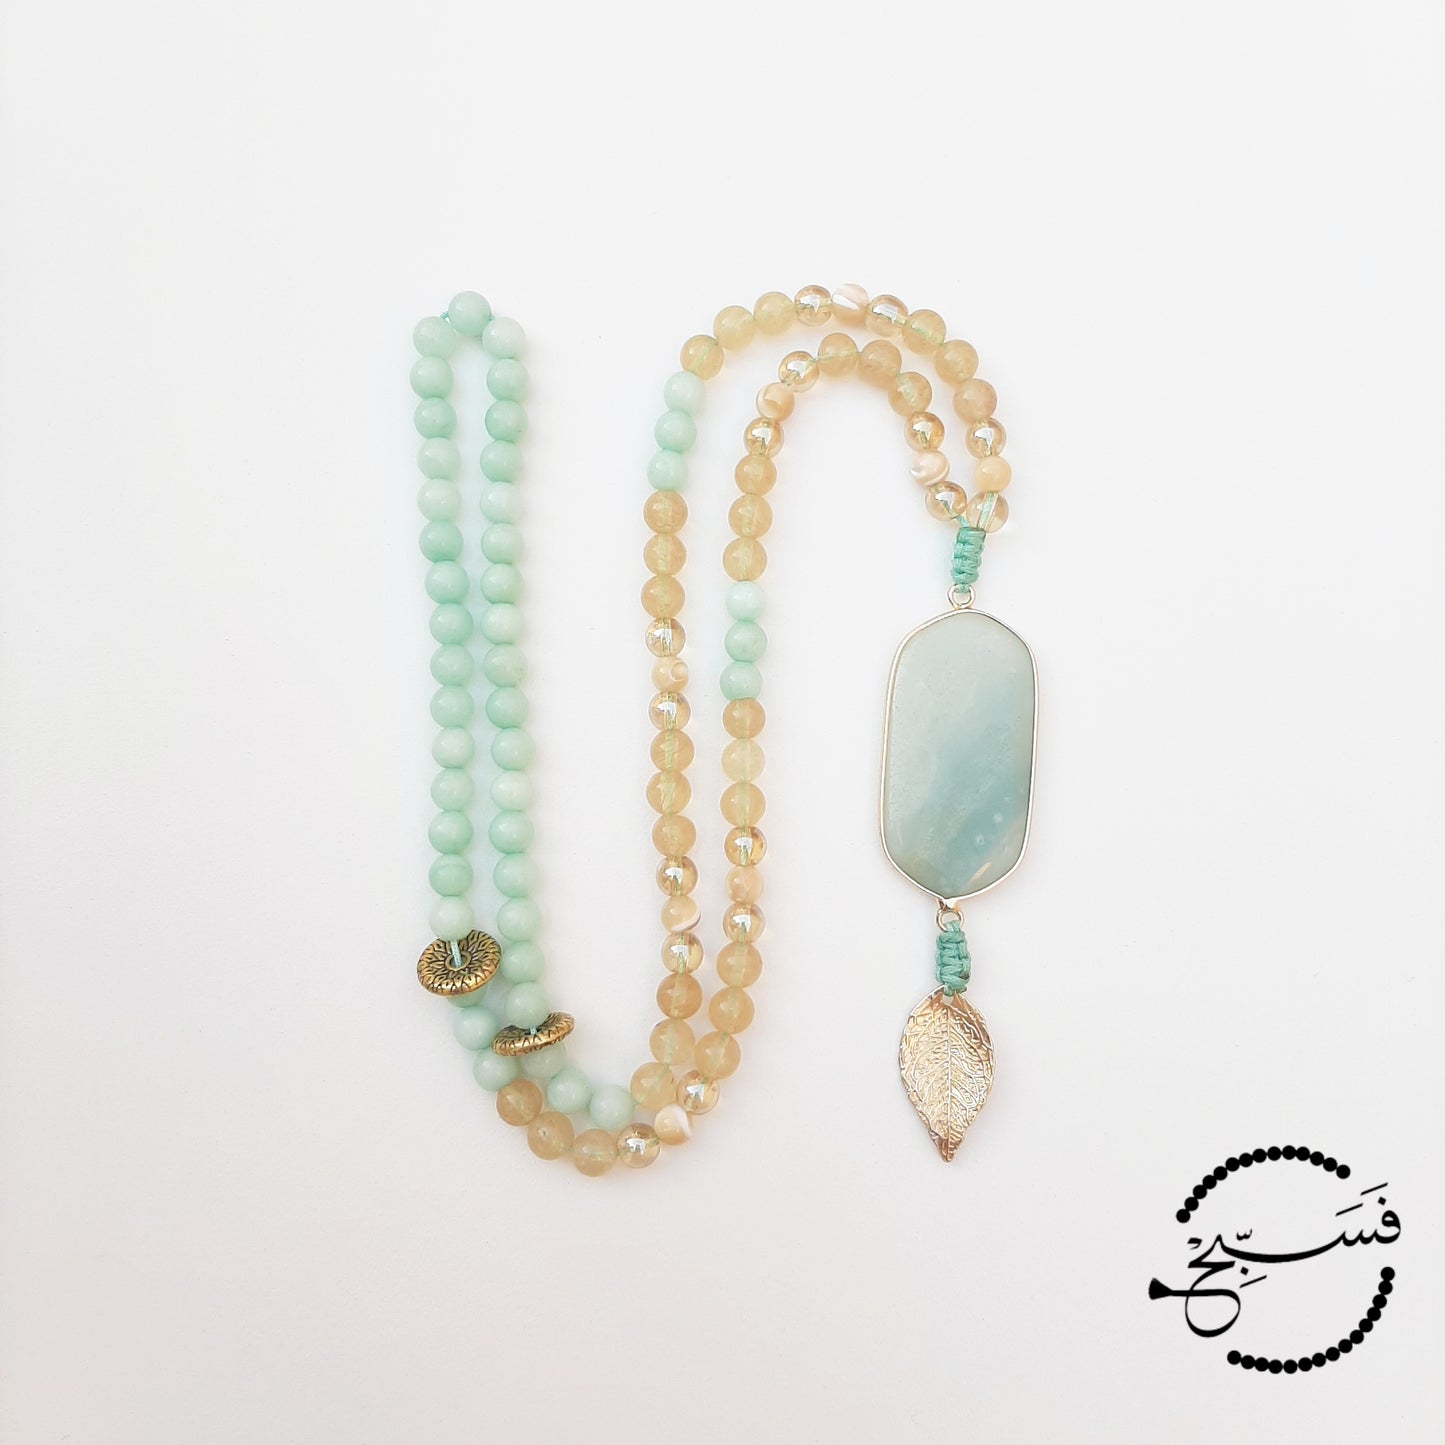 Amazonite. Dreamy shades of turquoise. Here we have used the lighter shade of amazonite with gold and natural trochus shell beads. Finished with an amazonite pendant and a gold leaf.  Packaged in a luxurious pouch and a gift box.  99 beads